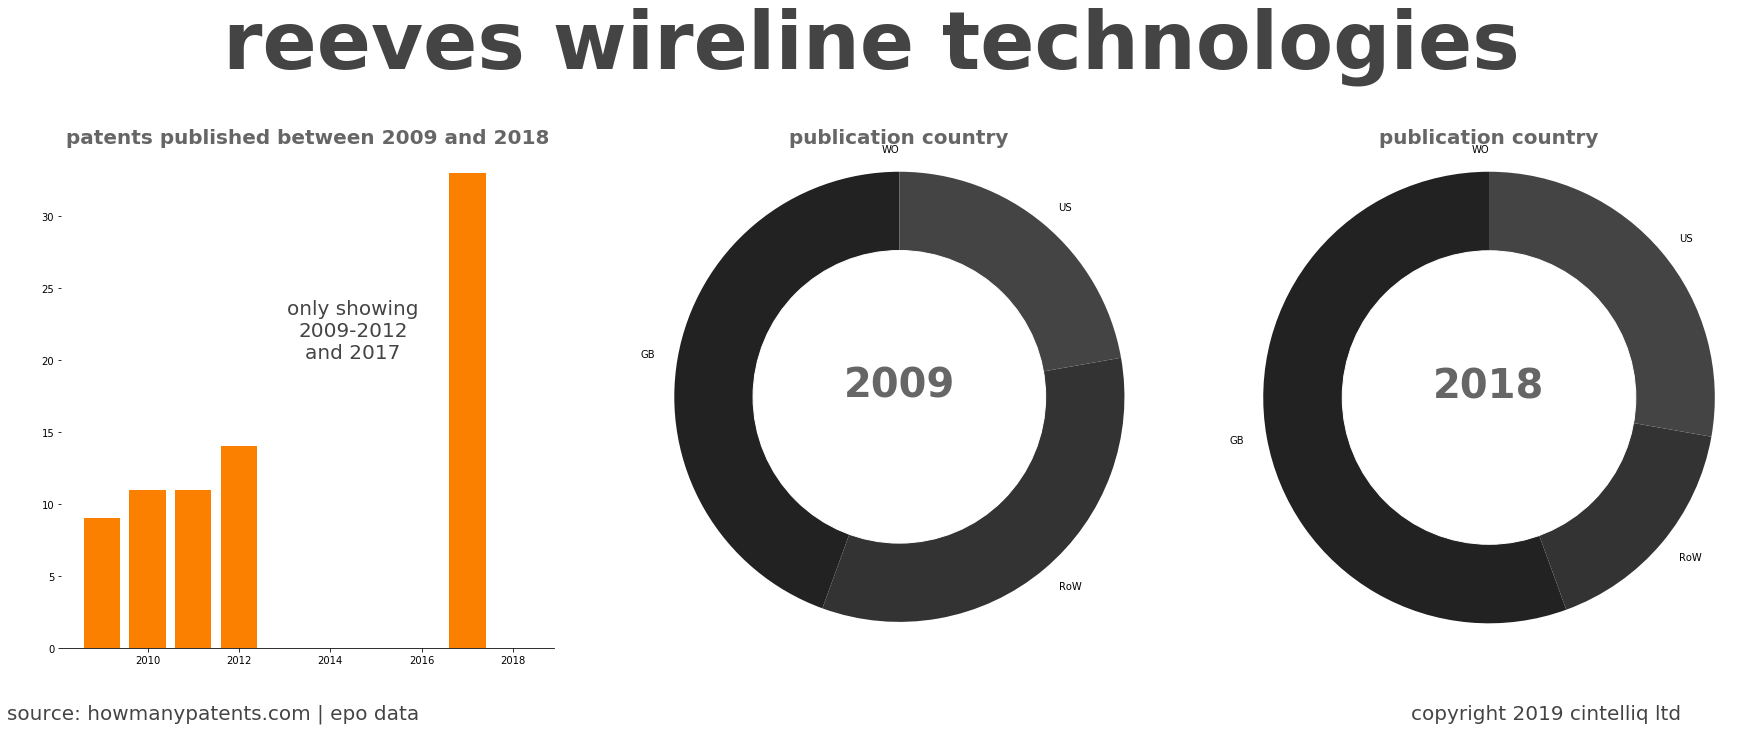 summary of patents for Reeves Wireline Technologies